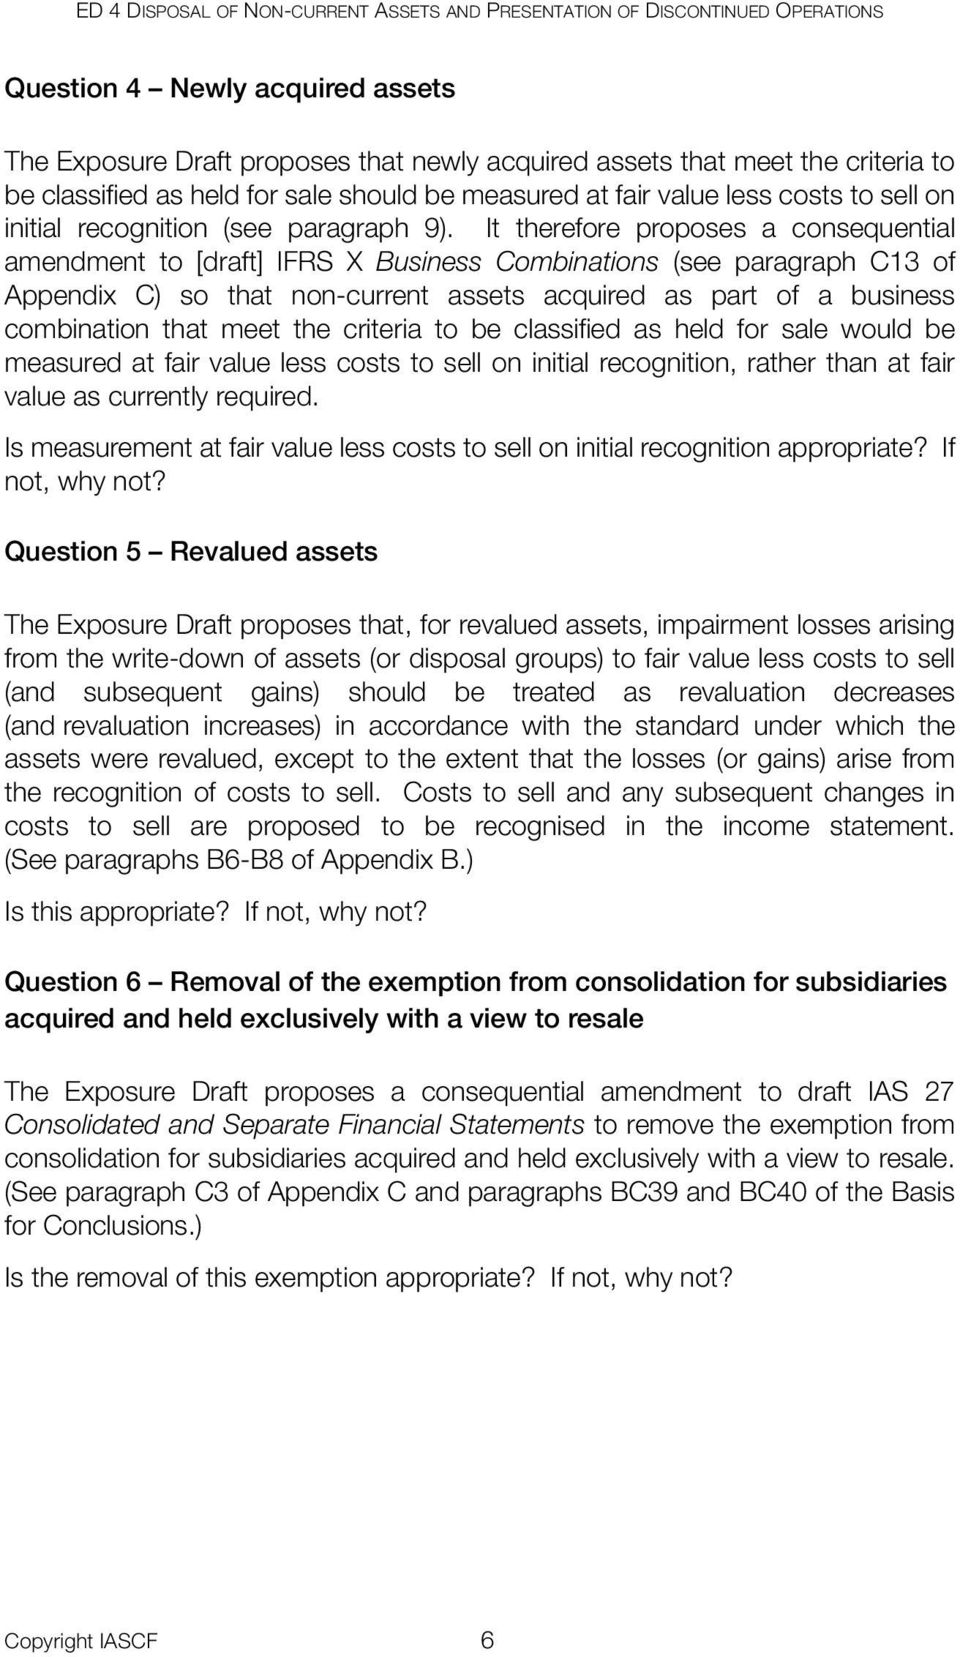 It therefore proposes a consequential amendment to [draft] IFRS X Business Combinations (see paragraph C13 of Appendix C) so that non-current assets acquired as part of a business combination that